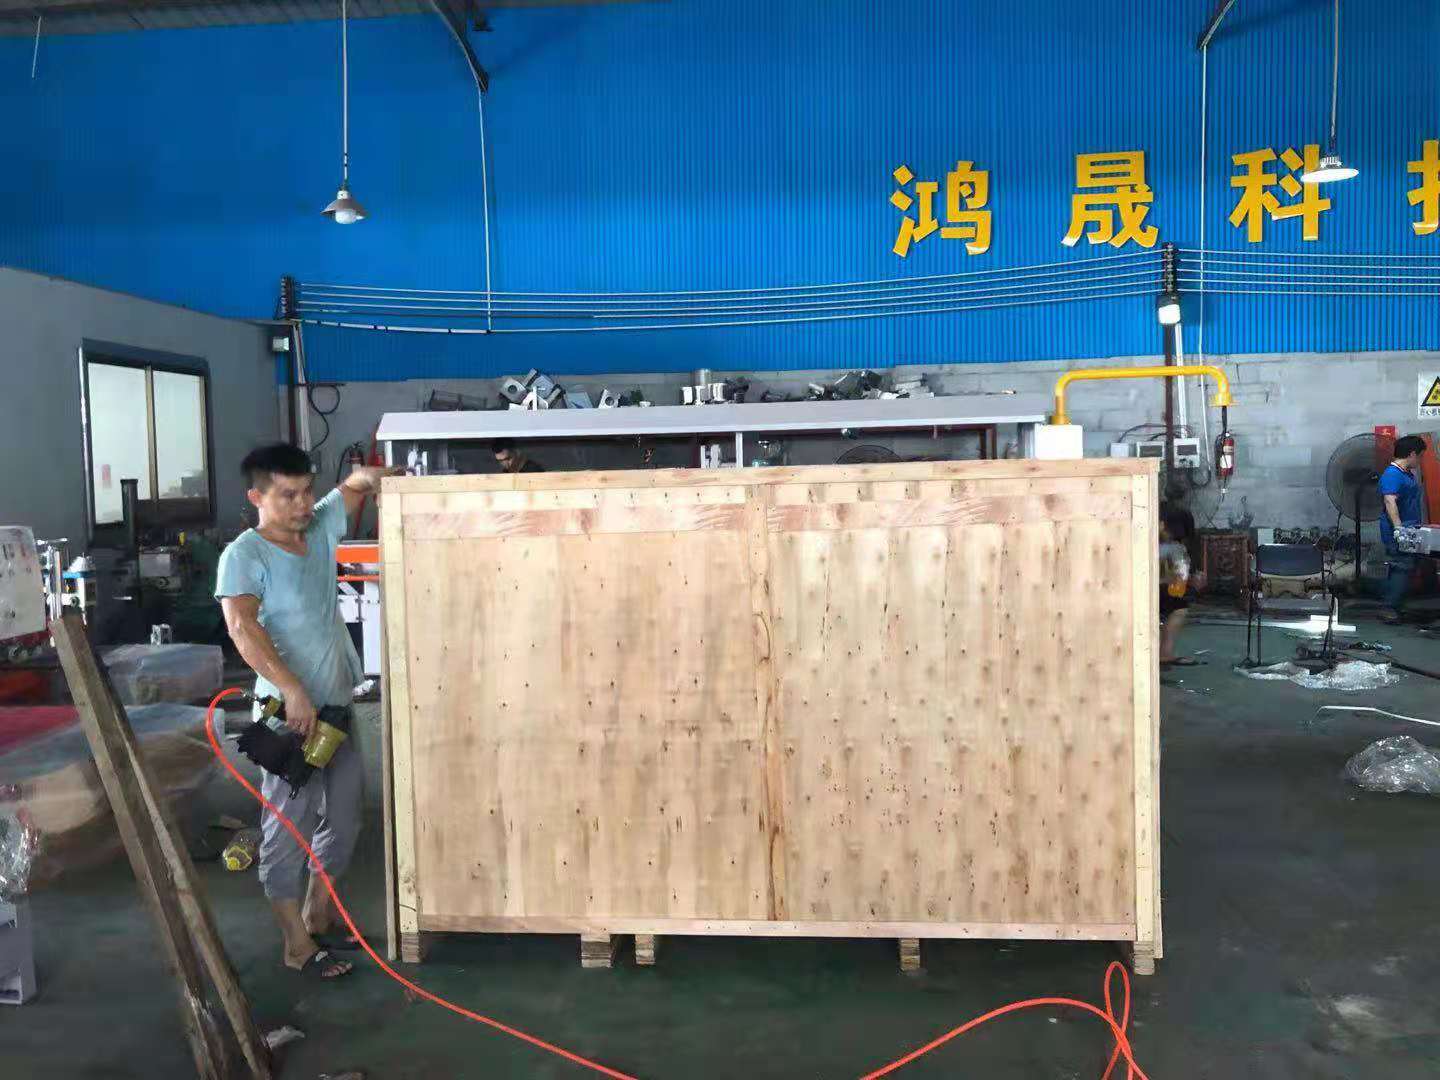 wooden case packing